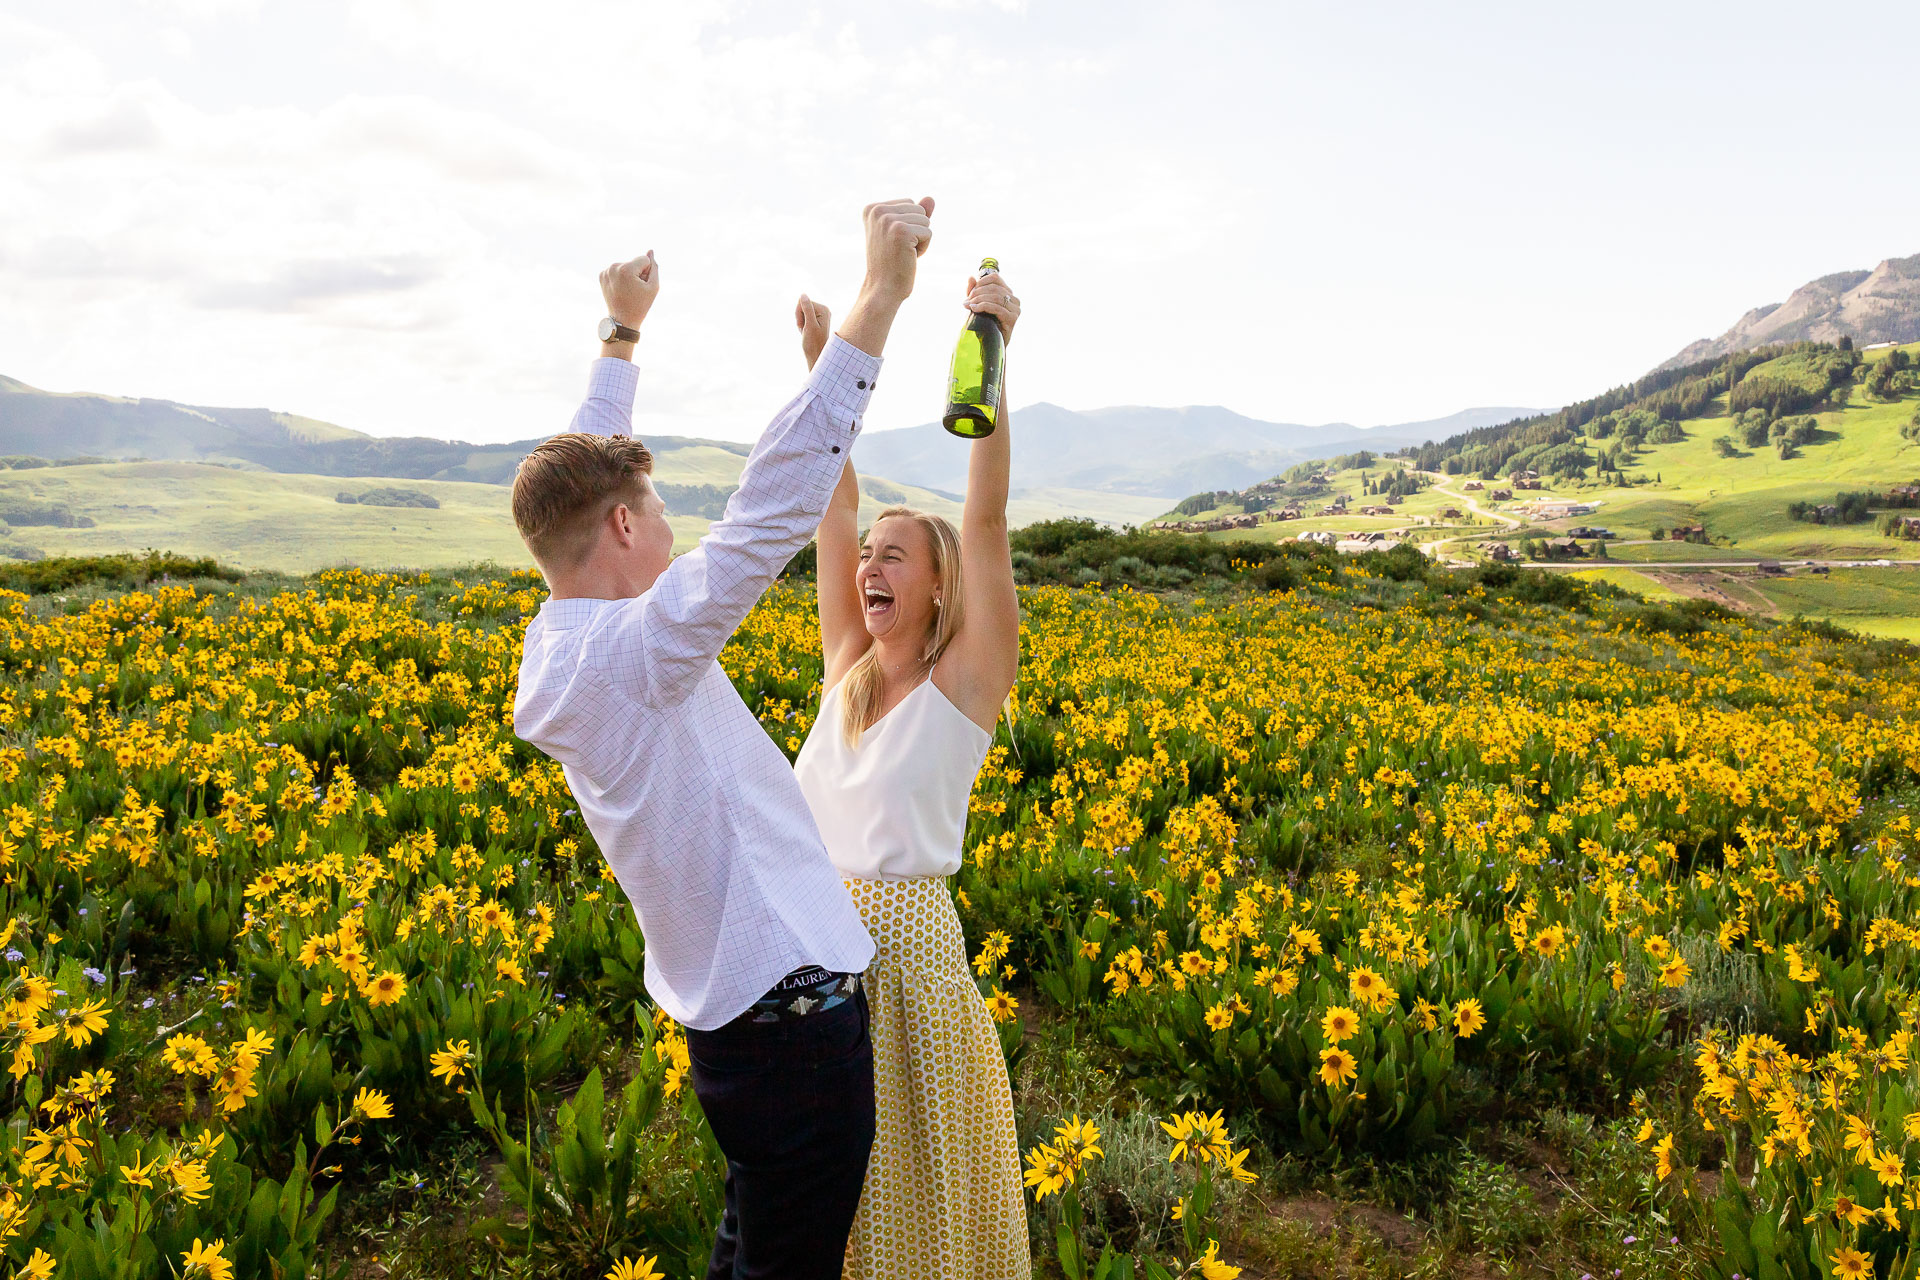 champagne cheers Crested Butte photographer Gunnison photographers Colorado photography - proposal engagement elopement wedding venue boudoir - photo by Mountain Magic Media